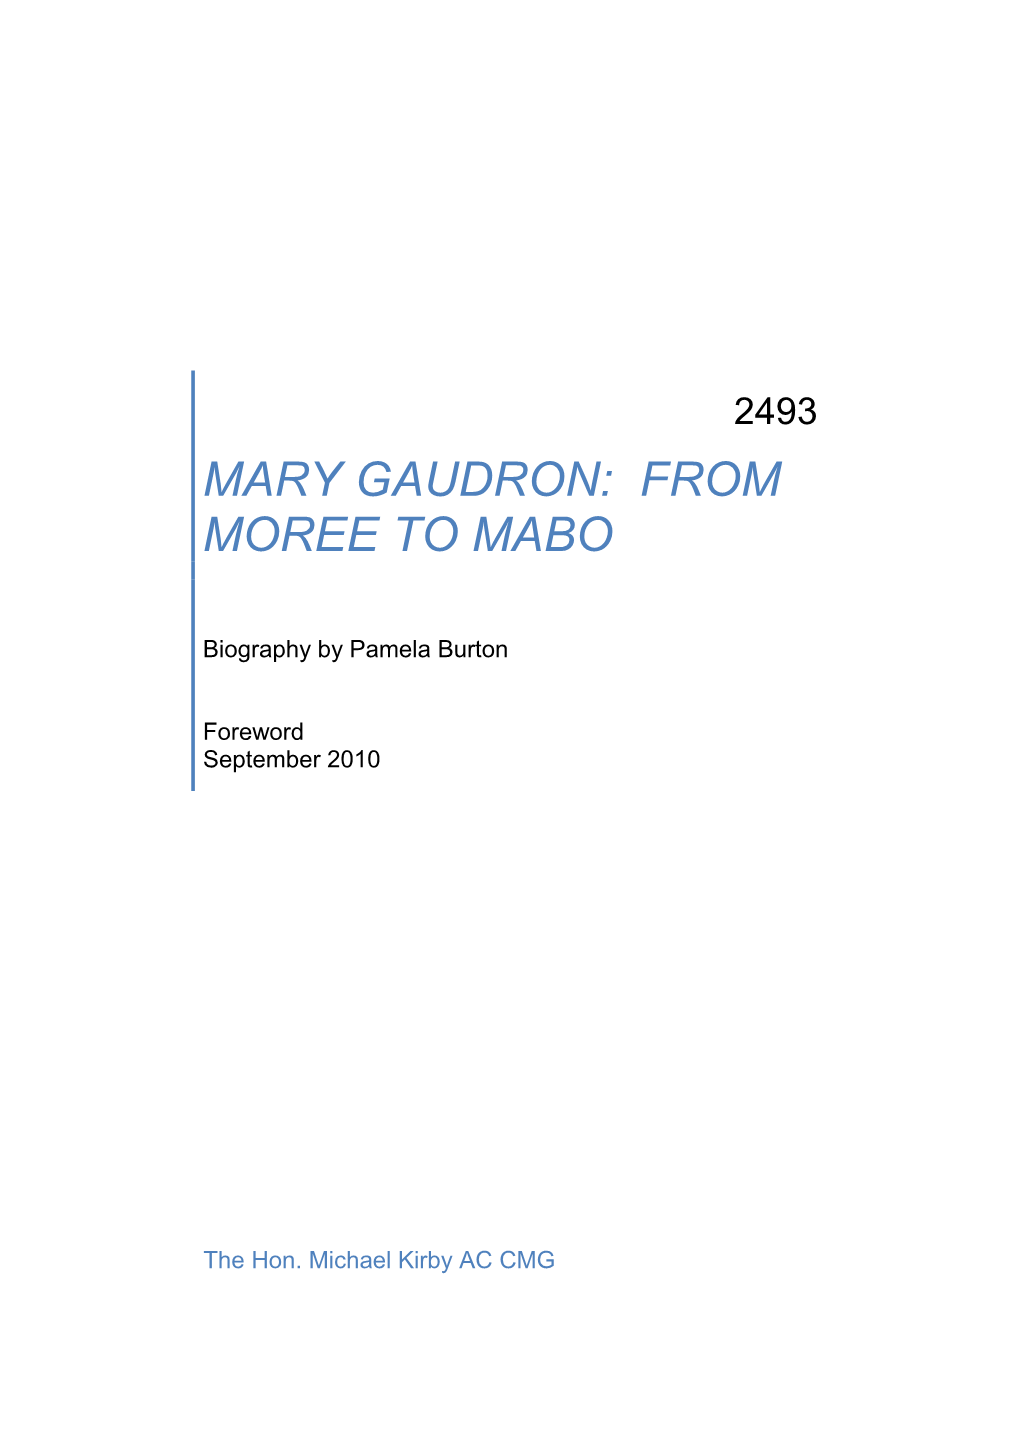 2493. Foreword to Pamela Burton's Biography "Mary Gaudron: from Moree to Mabo"